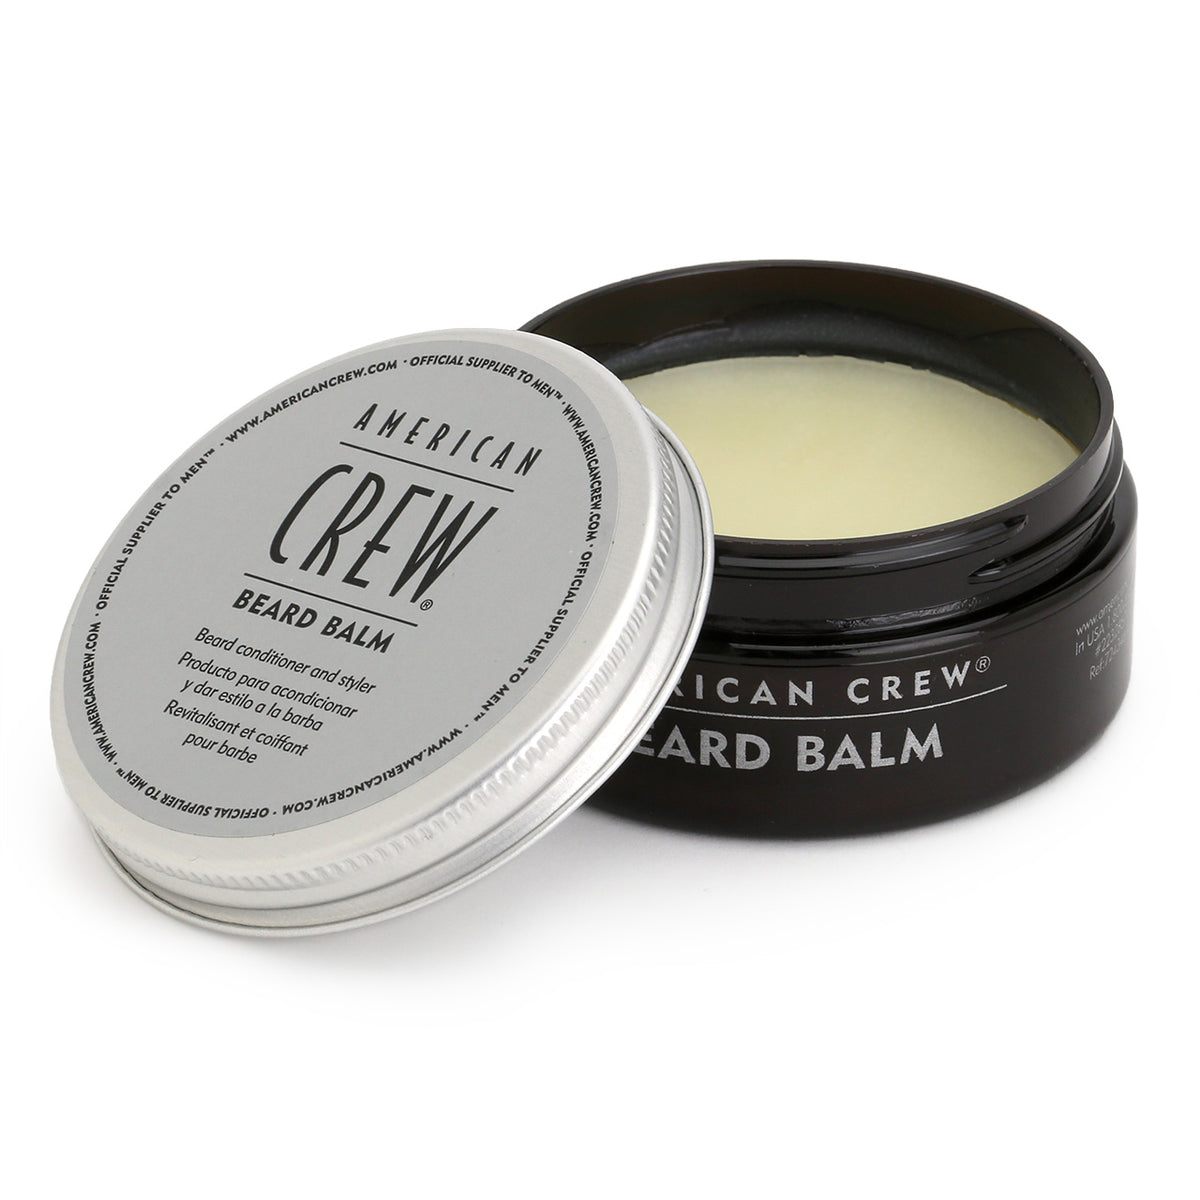 Three quarter view of the tub of American Crew Beard Balm which is black with an aluminium lid, and shows the buff-coloured product inside